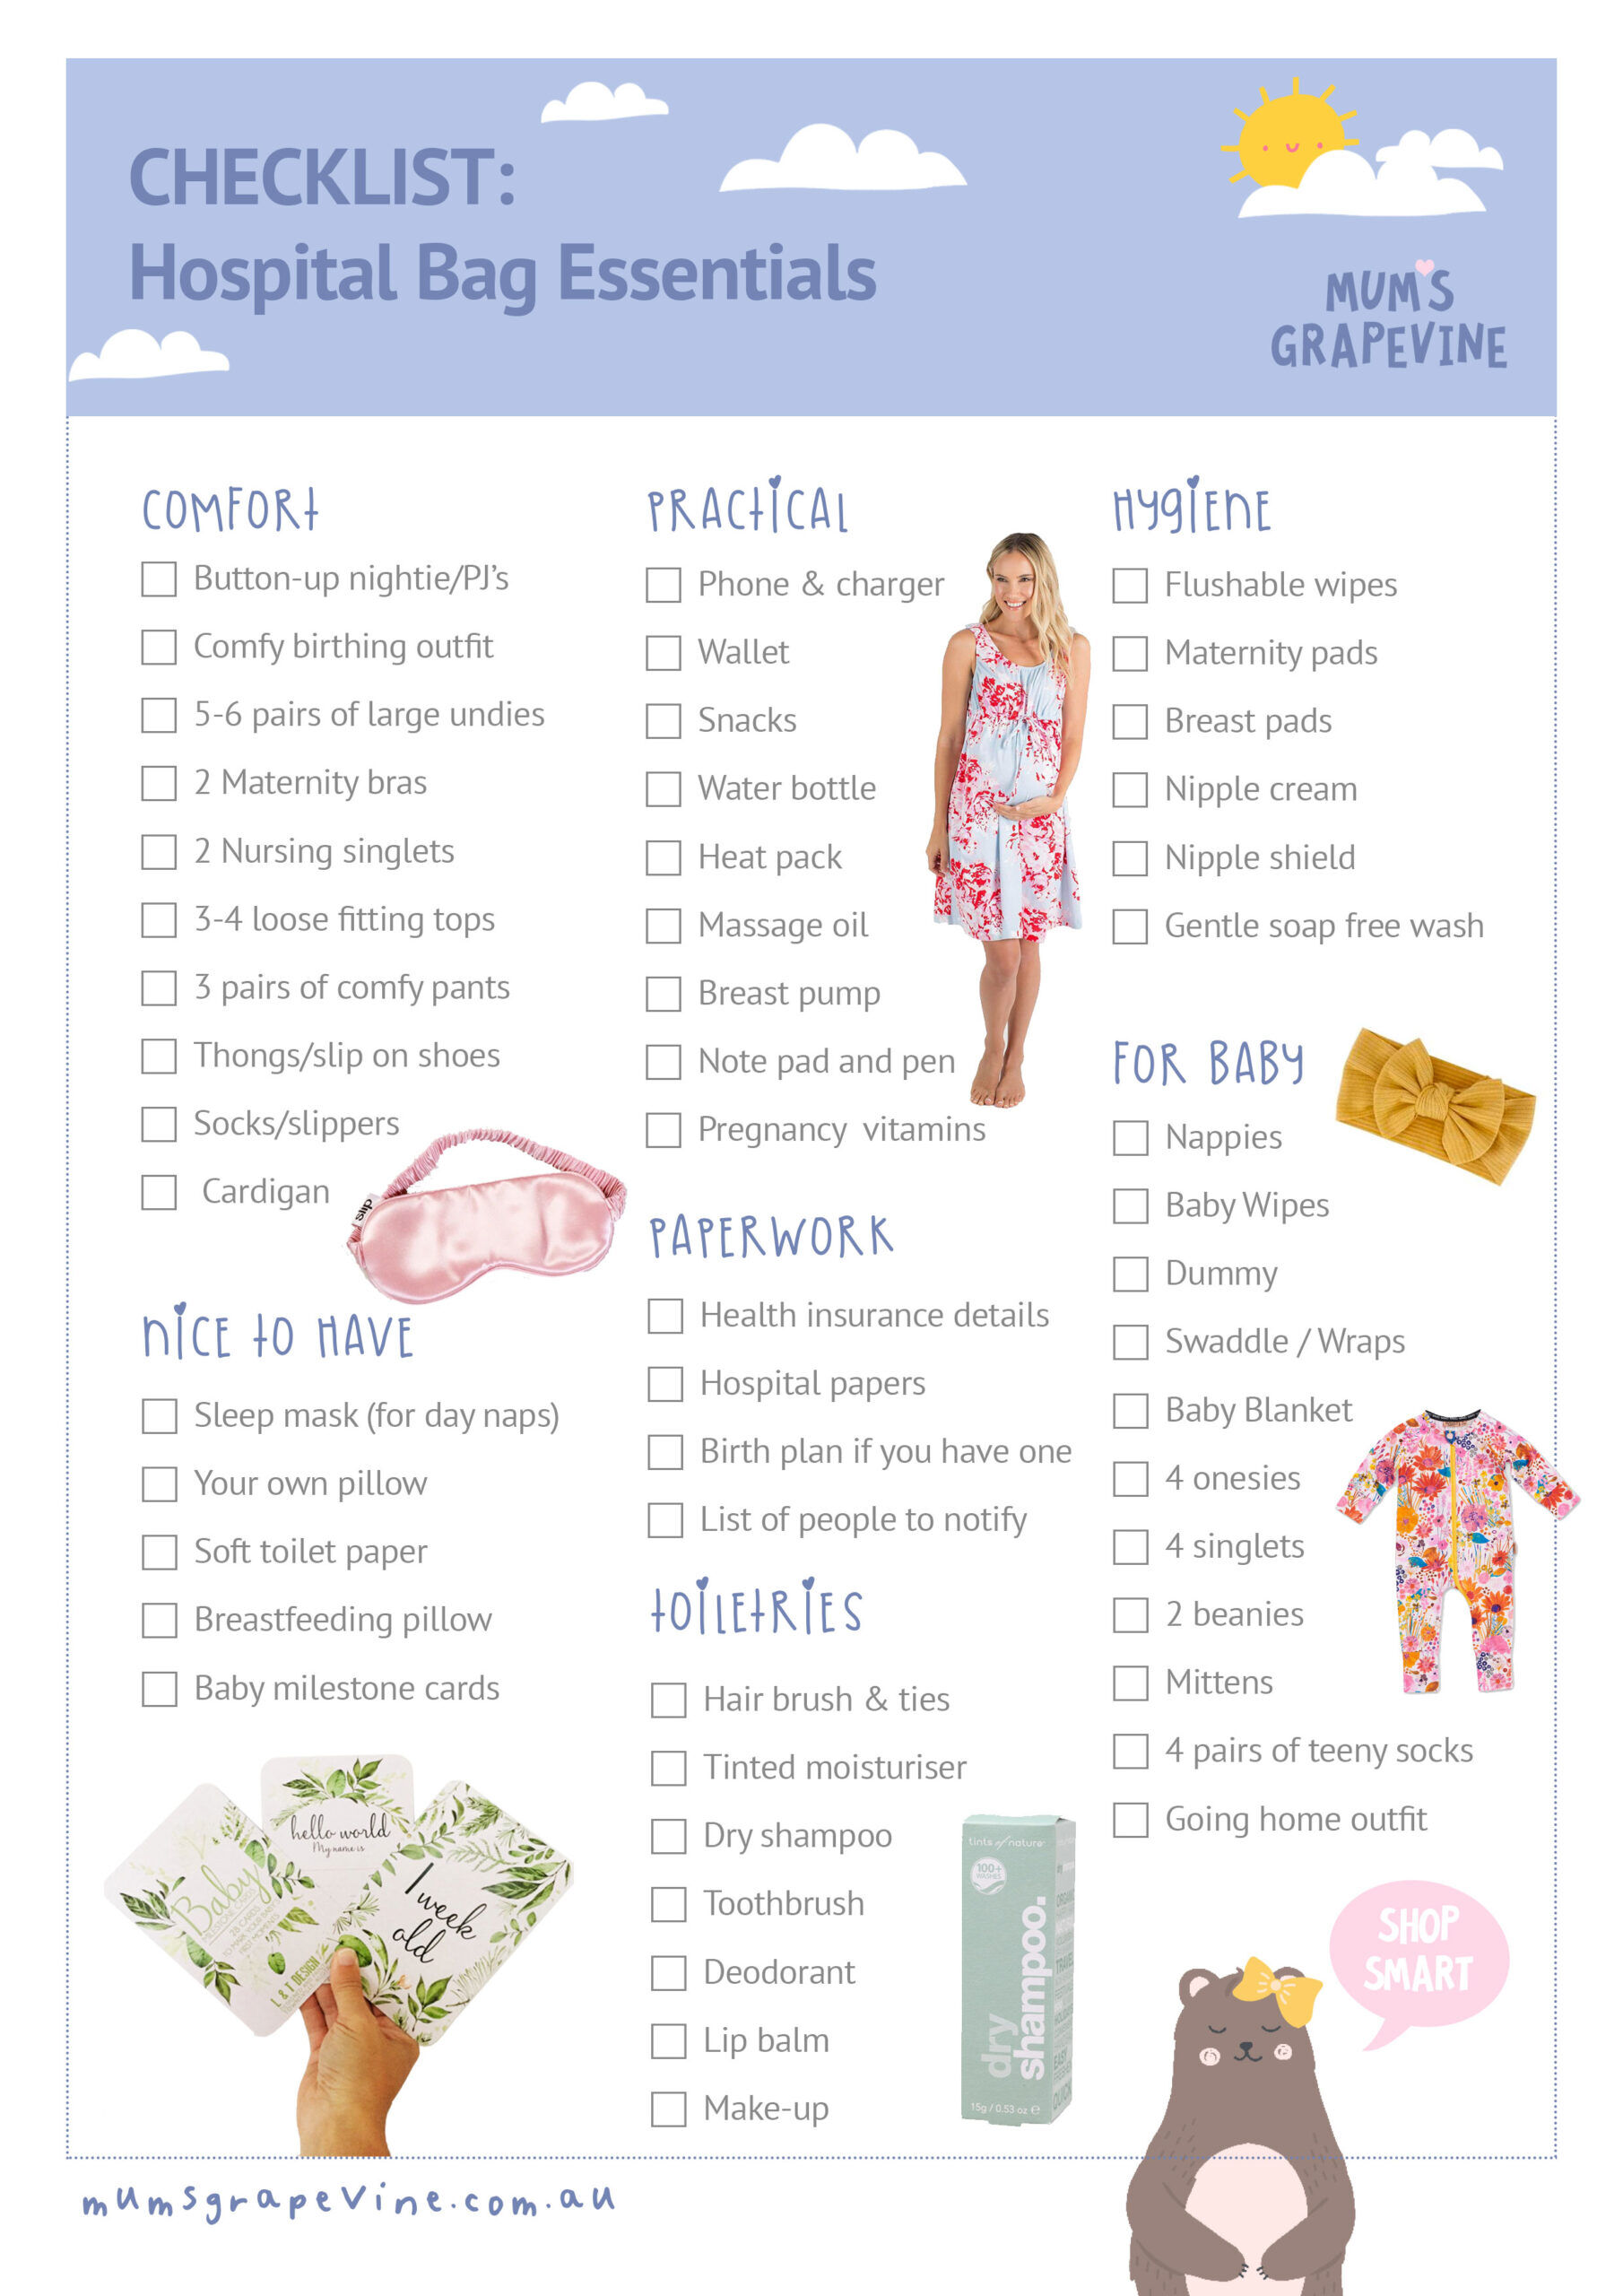 39 weeks: Hospital Bag + Top Baby Items we have set up - Pines and